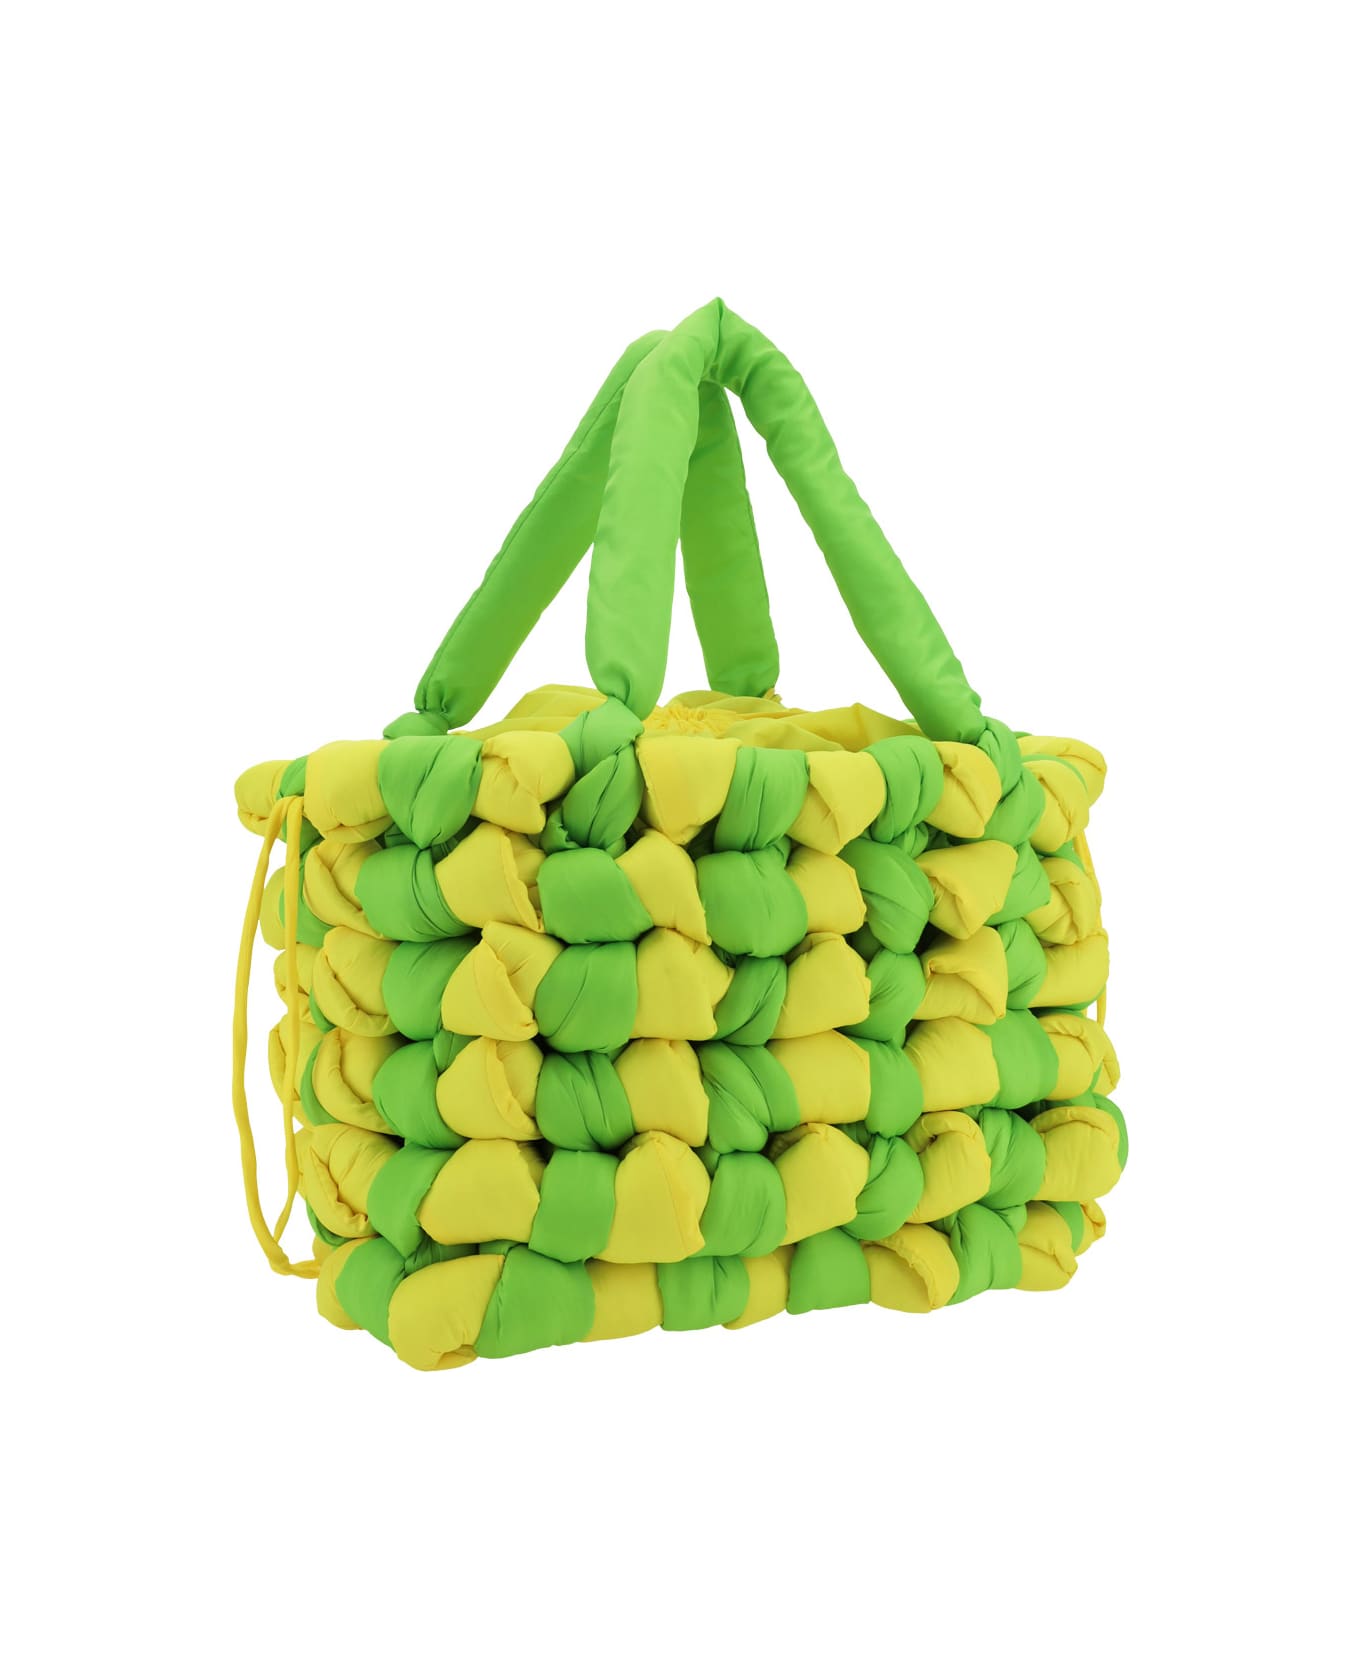 J.W. Anderson Knotted Tote Bag - Lime Green/yellow